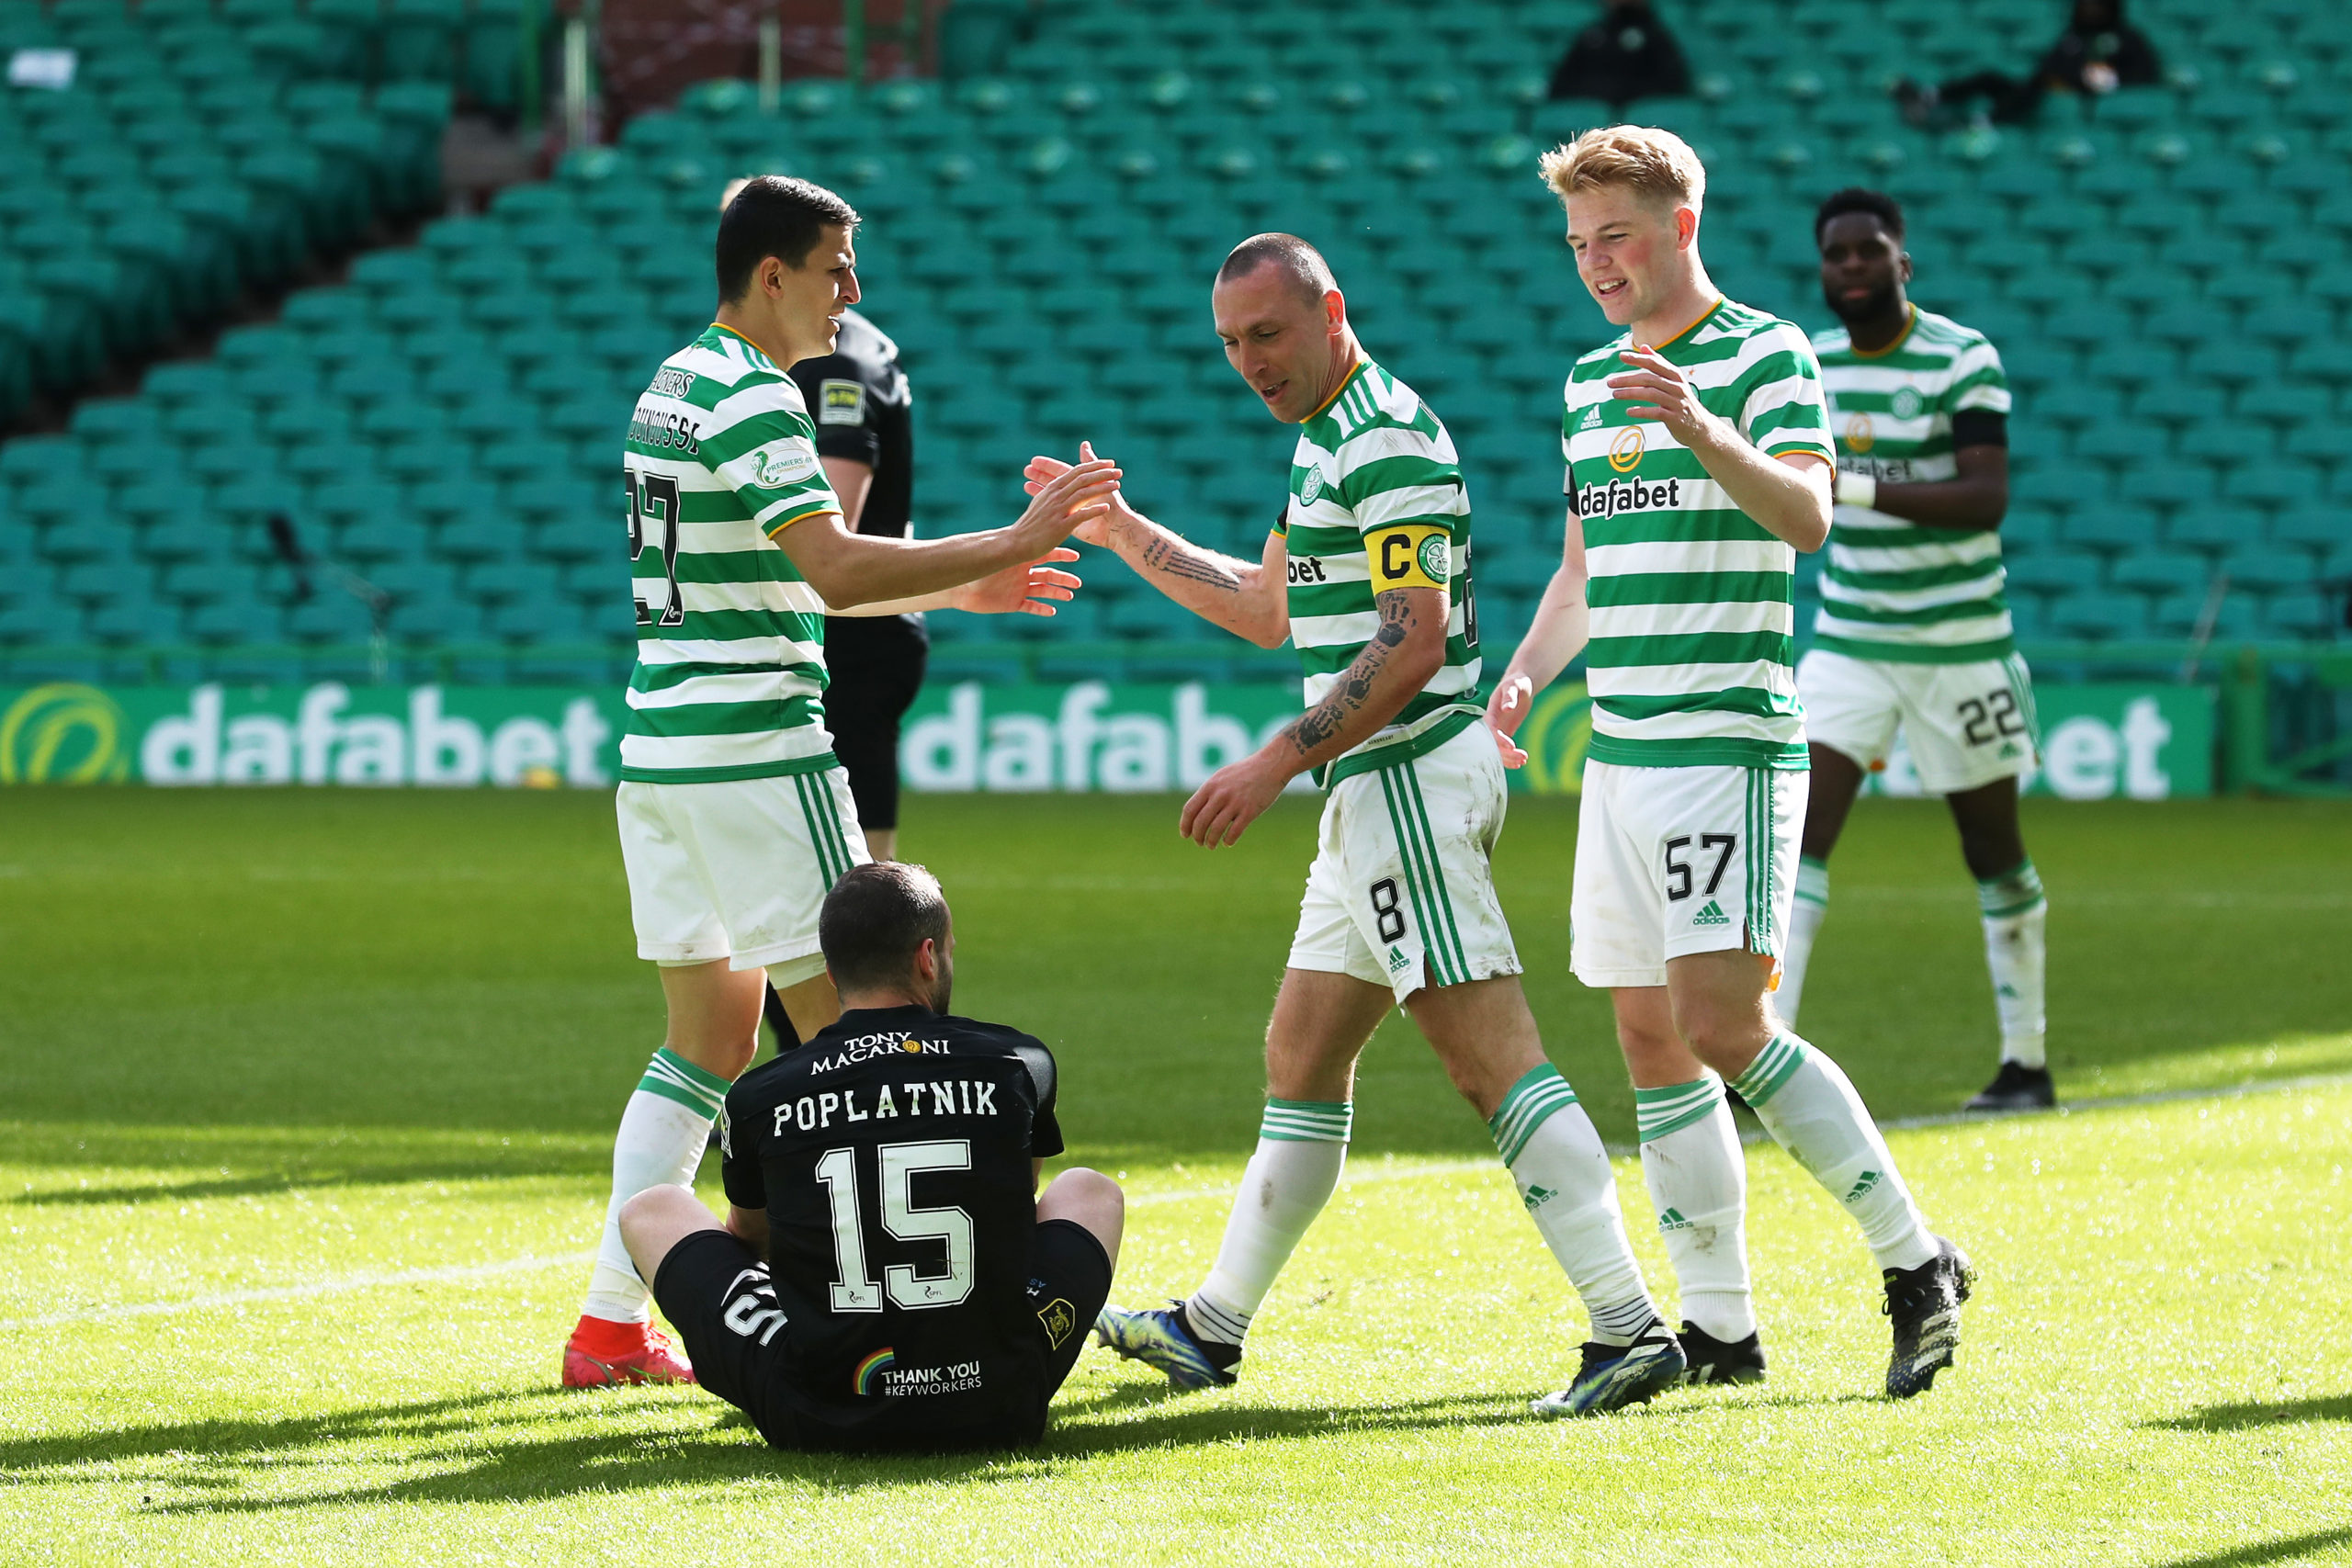 Celtic tactics: John Kennedy has figured out a key problem area for the Bhoys